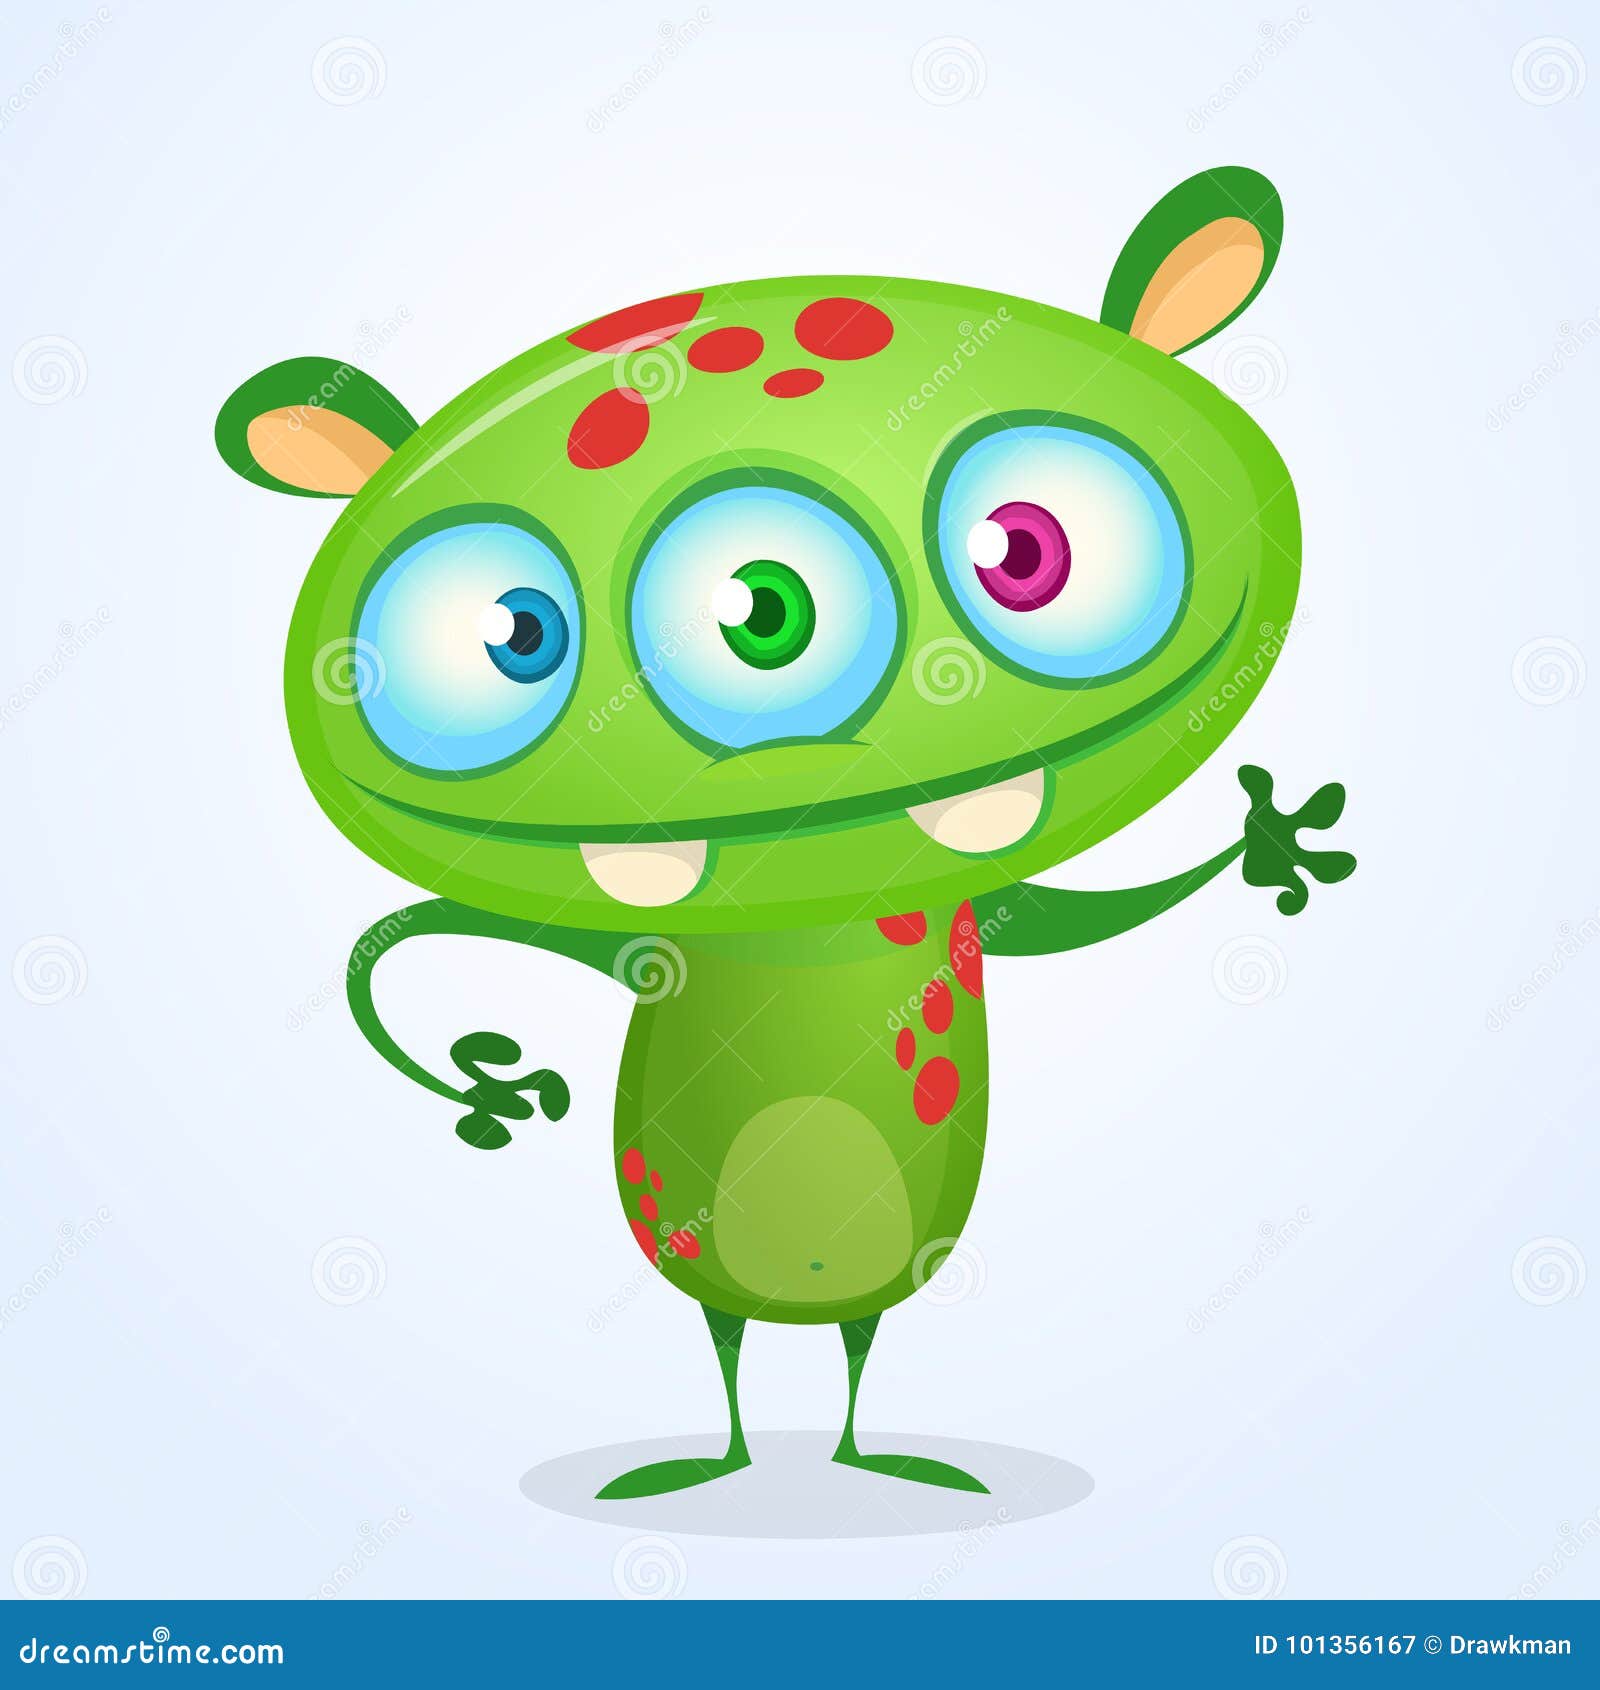 Green Funny Happy Cartoon Monster. Green Vector Alien Character with Three  Eyes Stock Vector - Illustration of icon, green: 101356167